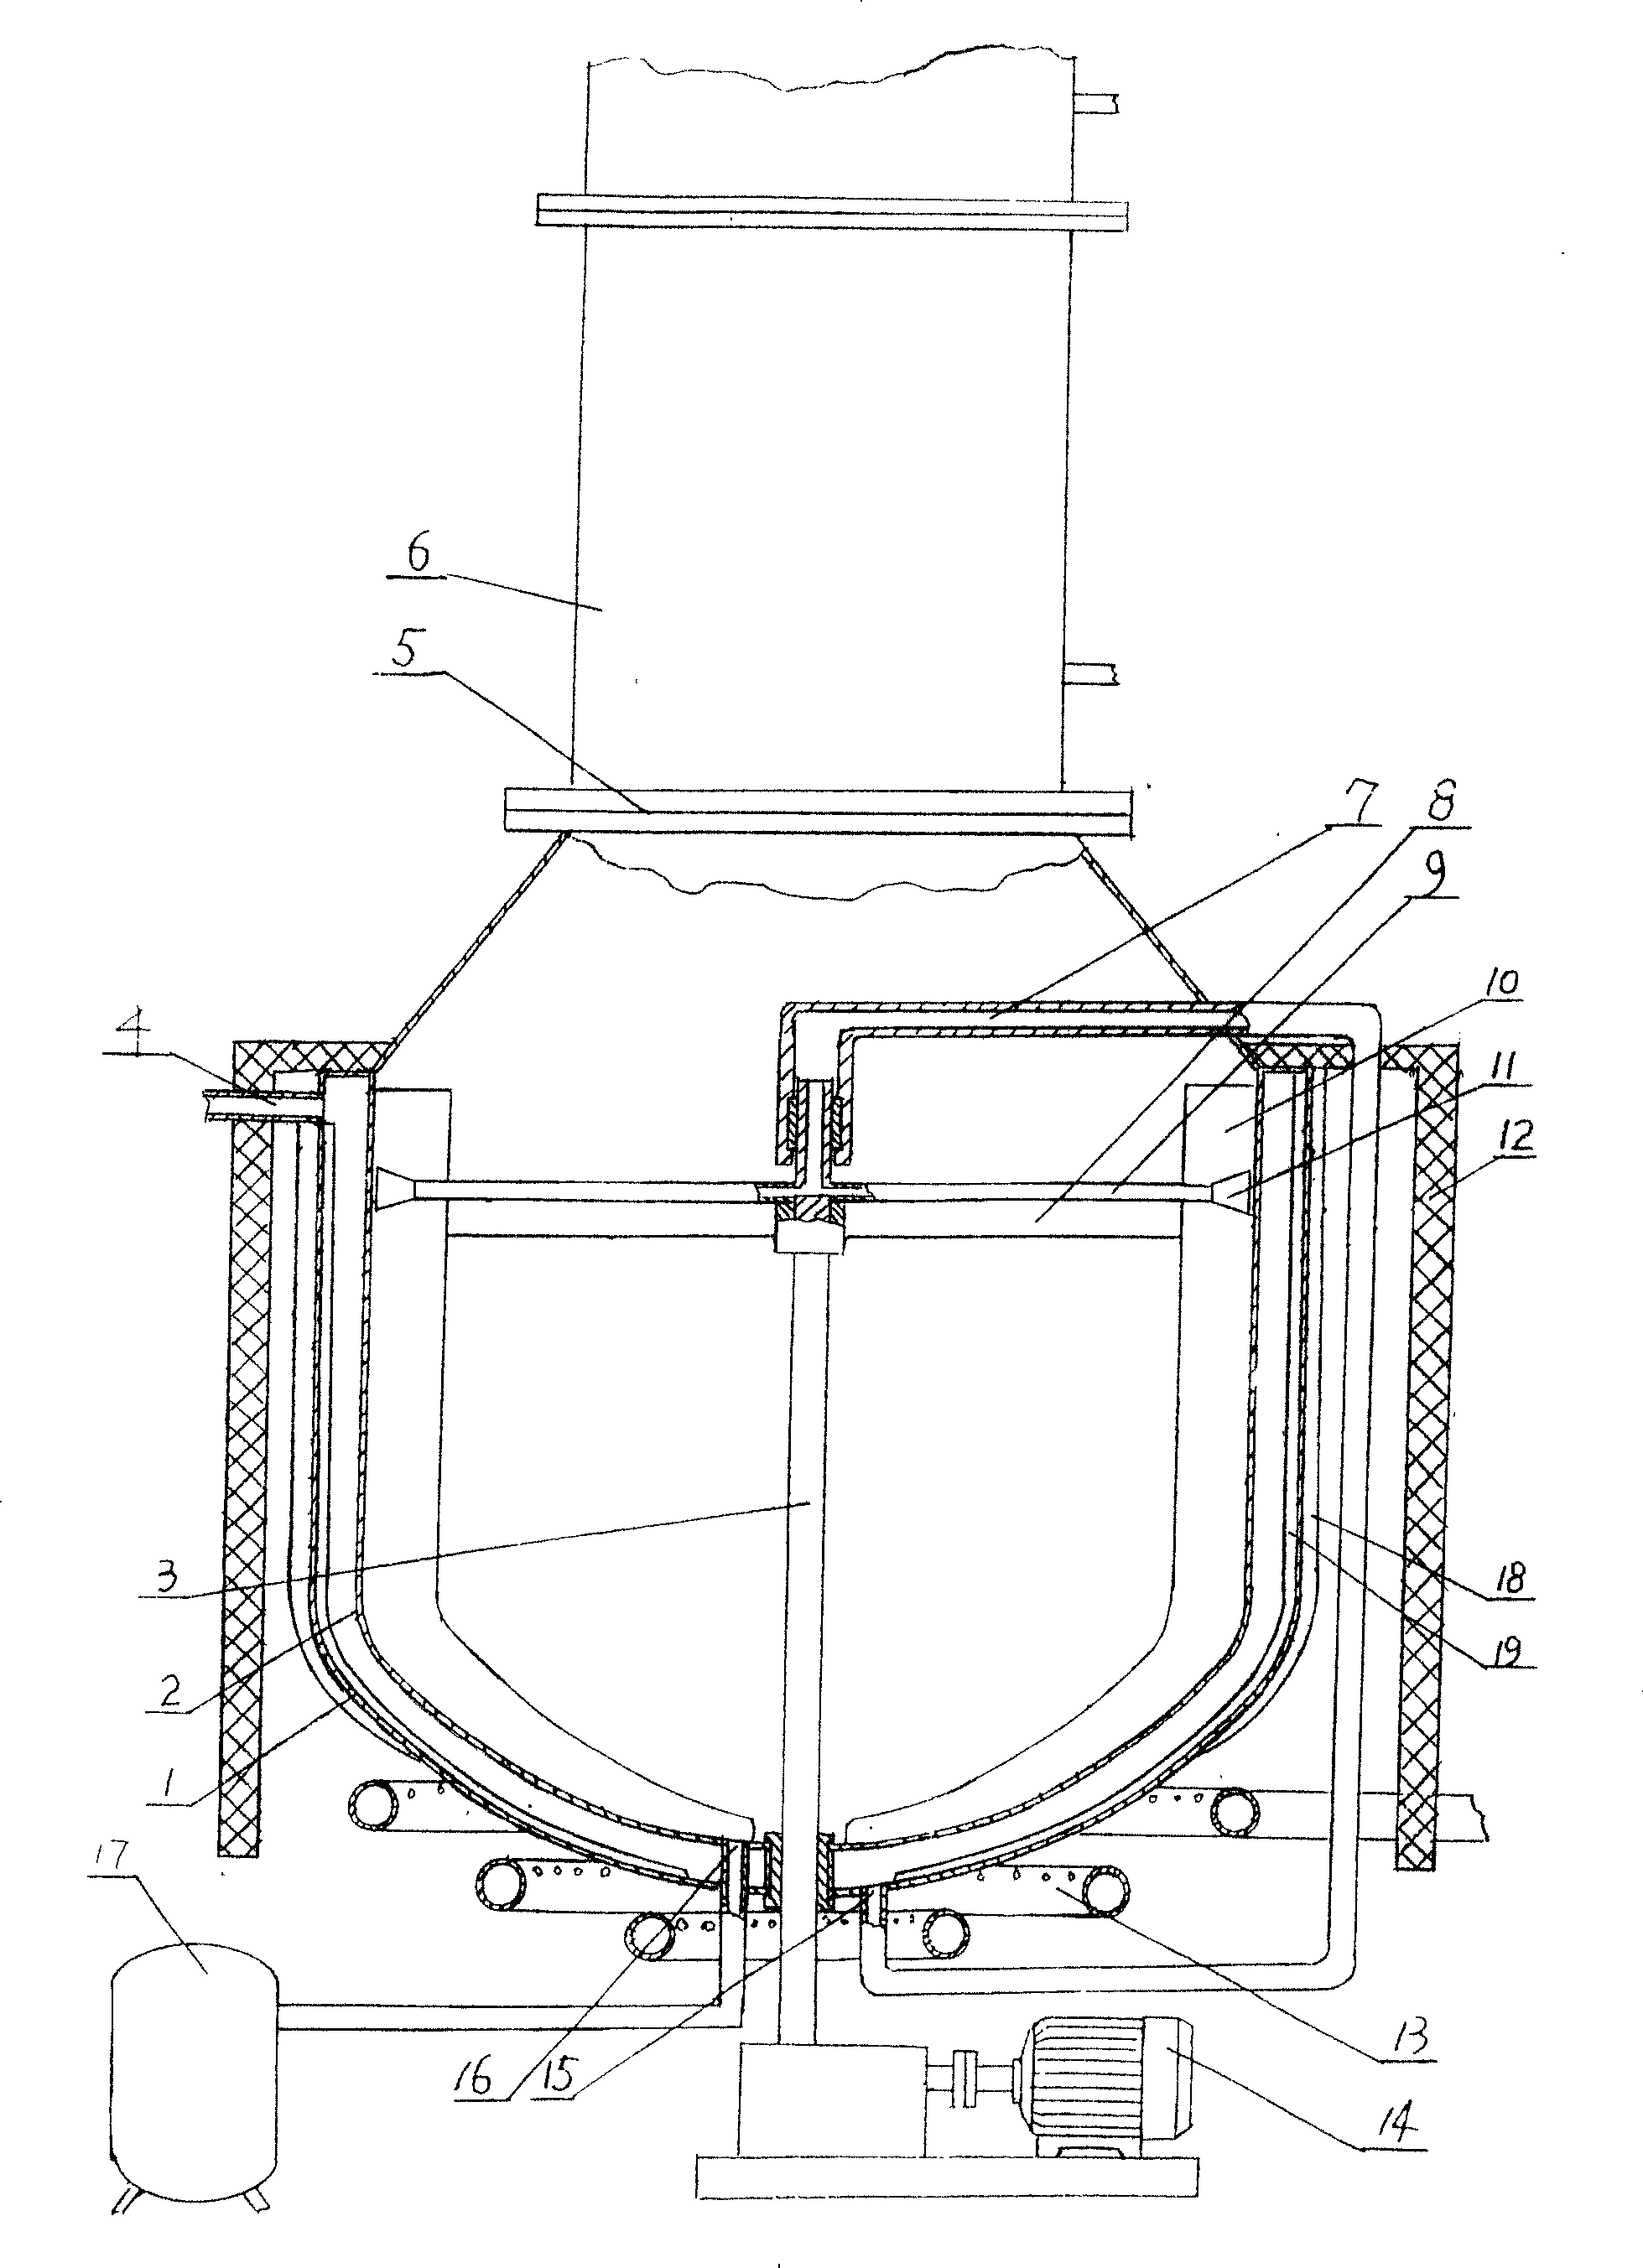 Regeneration processing device for waste lubricant oil